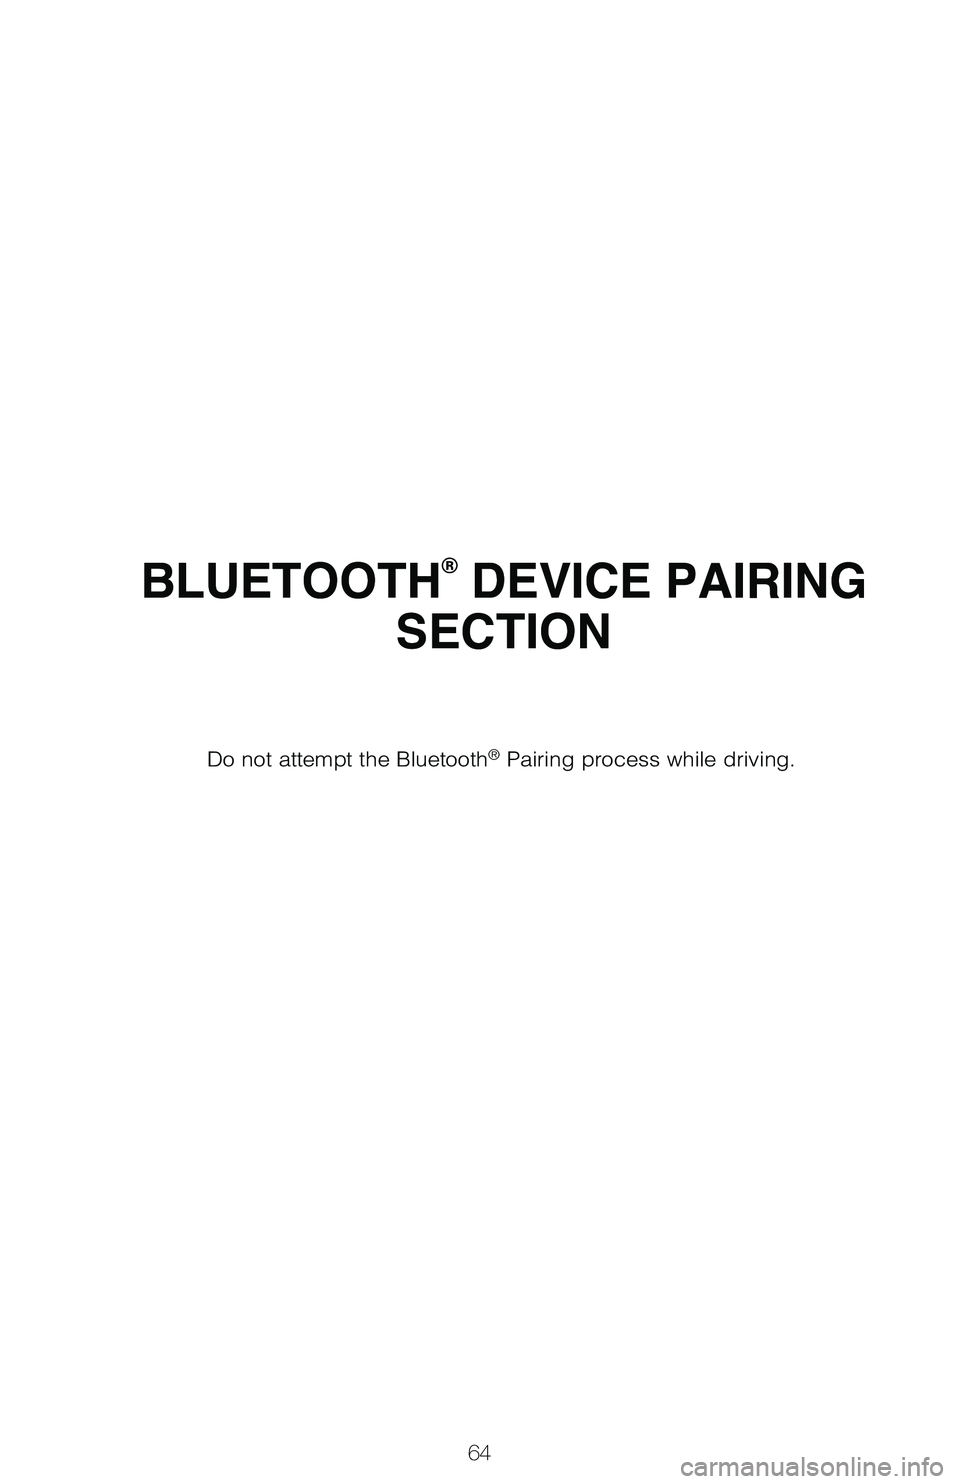 TOYOTA HIGHLANDER HYBRID 2021  Owners Manual (in English) 64
BLUETOOTH® DEVICE PAIRING 
SECTION
Do not attempt the Bluetooth® Pairing process while driving.
130493_MY21_Highlander_HV_QRG_V6_ML_070821_PRINT_R1.indd   64130493_MY21_Highlander_HV_QRG_V6_ML_07